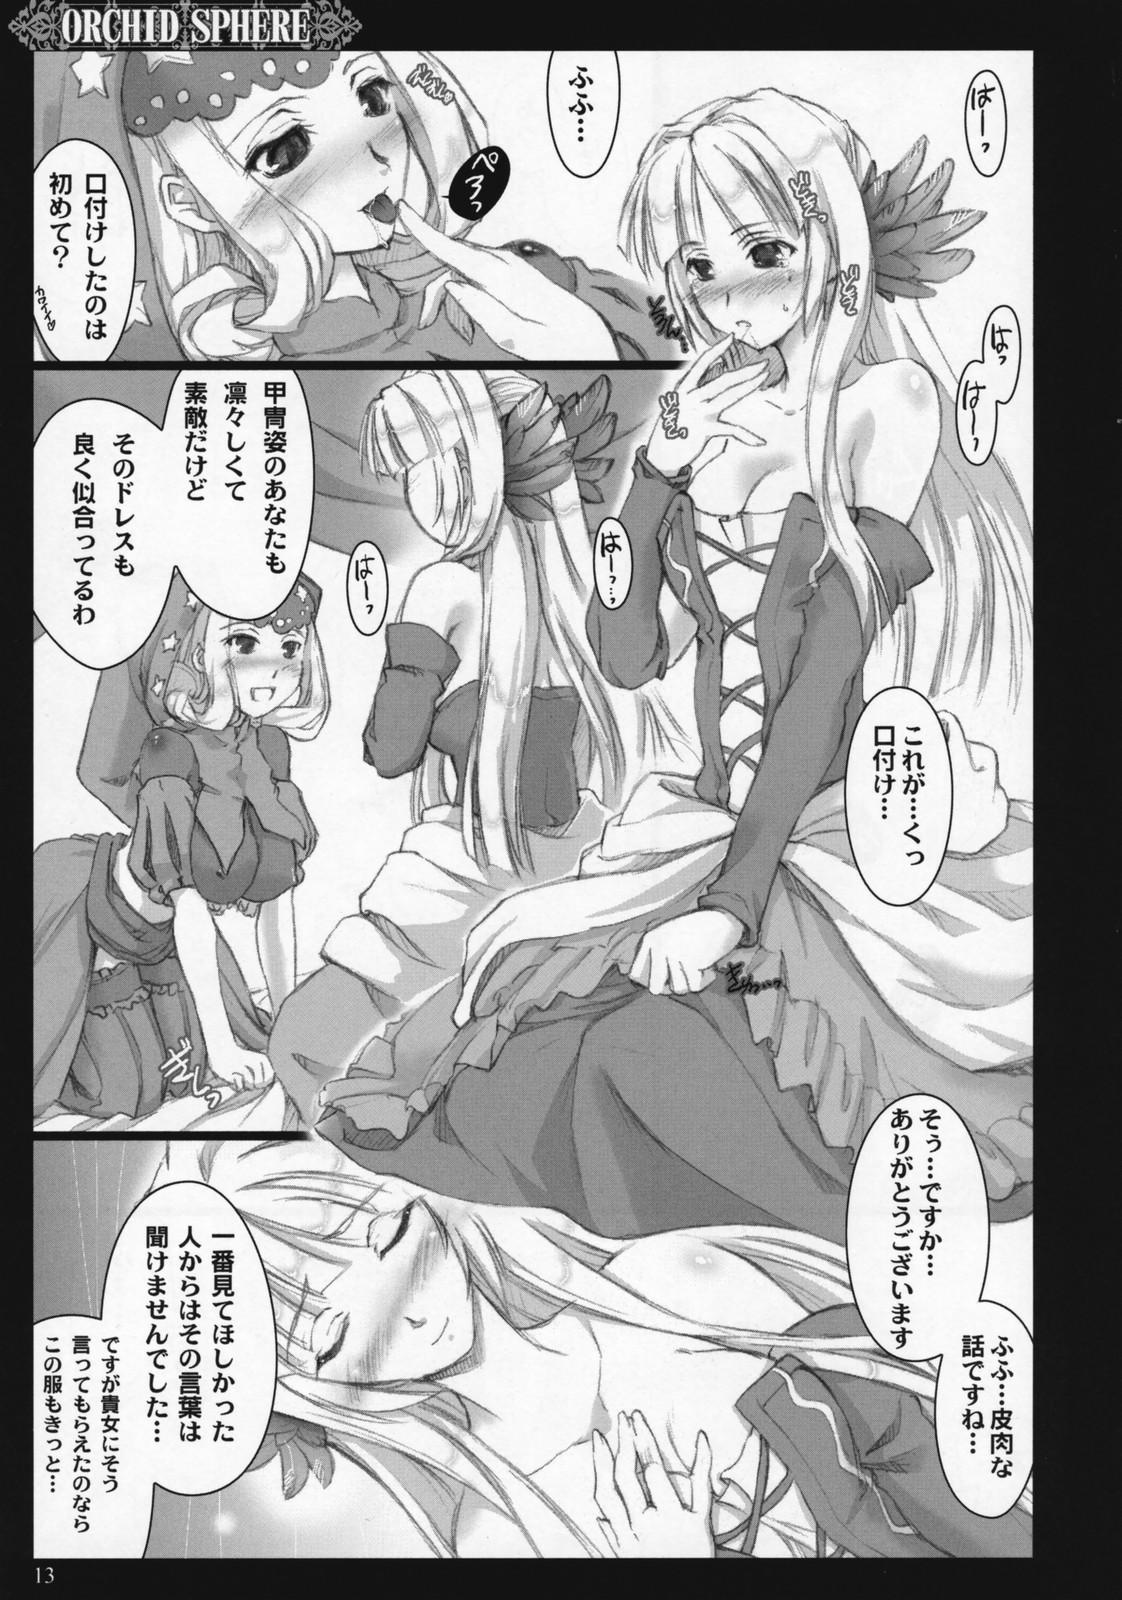 Bucetinha Orchid Sphere - Odin sphere Fantasy Massage - Page 12